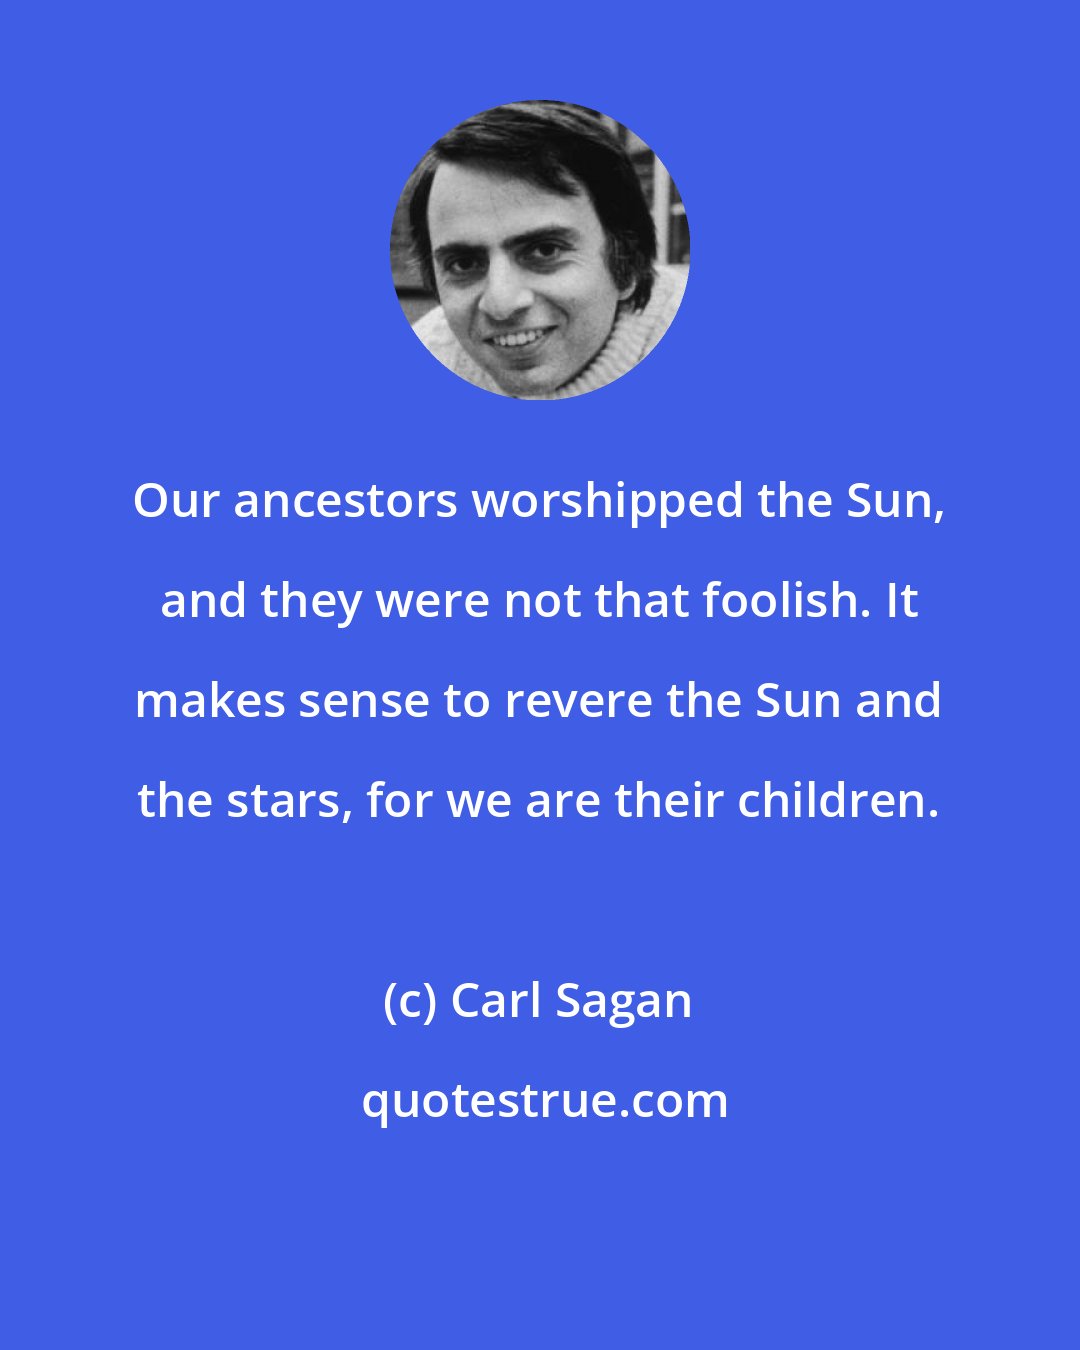 Carl Sagan: Our ancestors worshipped the Sun, and they were not that foolish. It makes sense to revere the Sun and the stars, for we are their children.